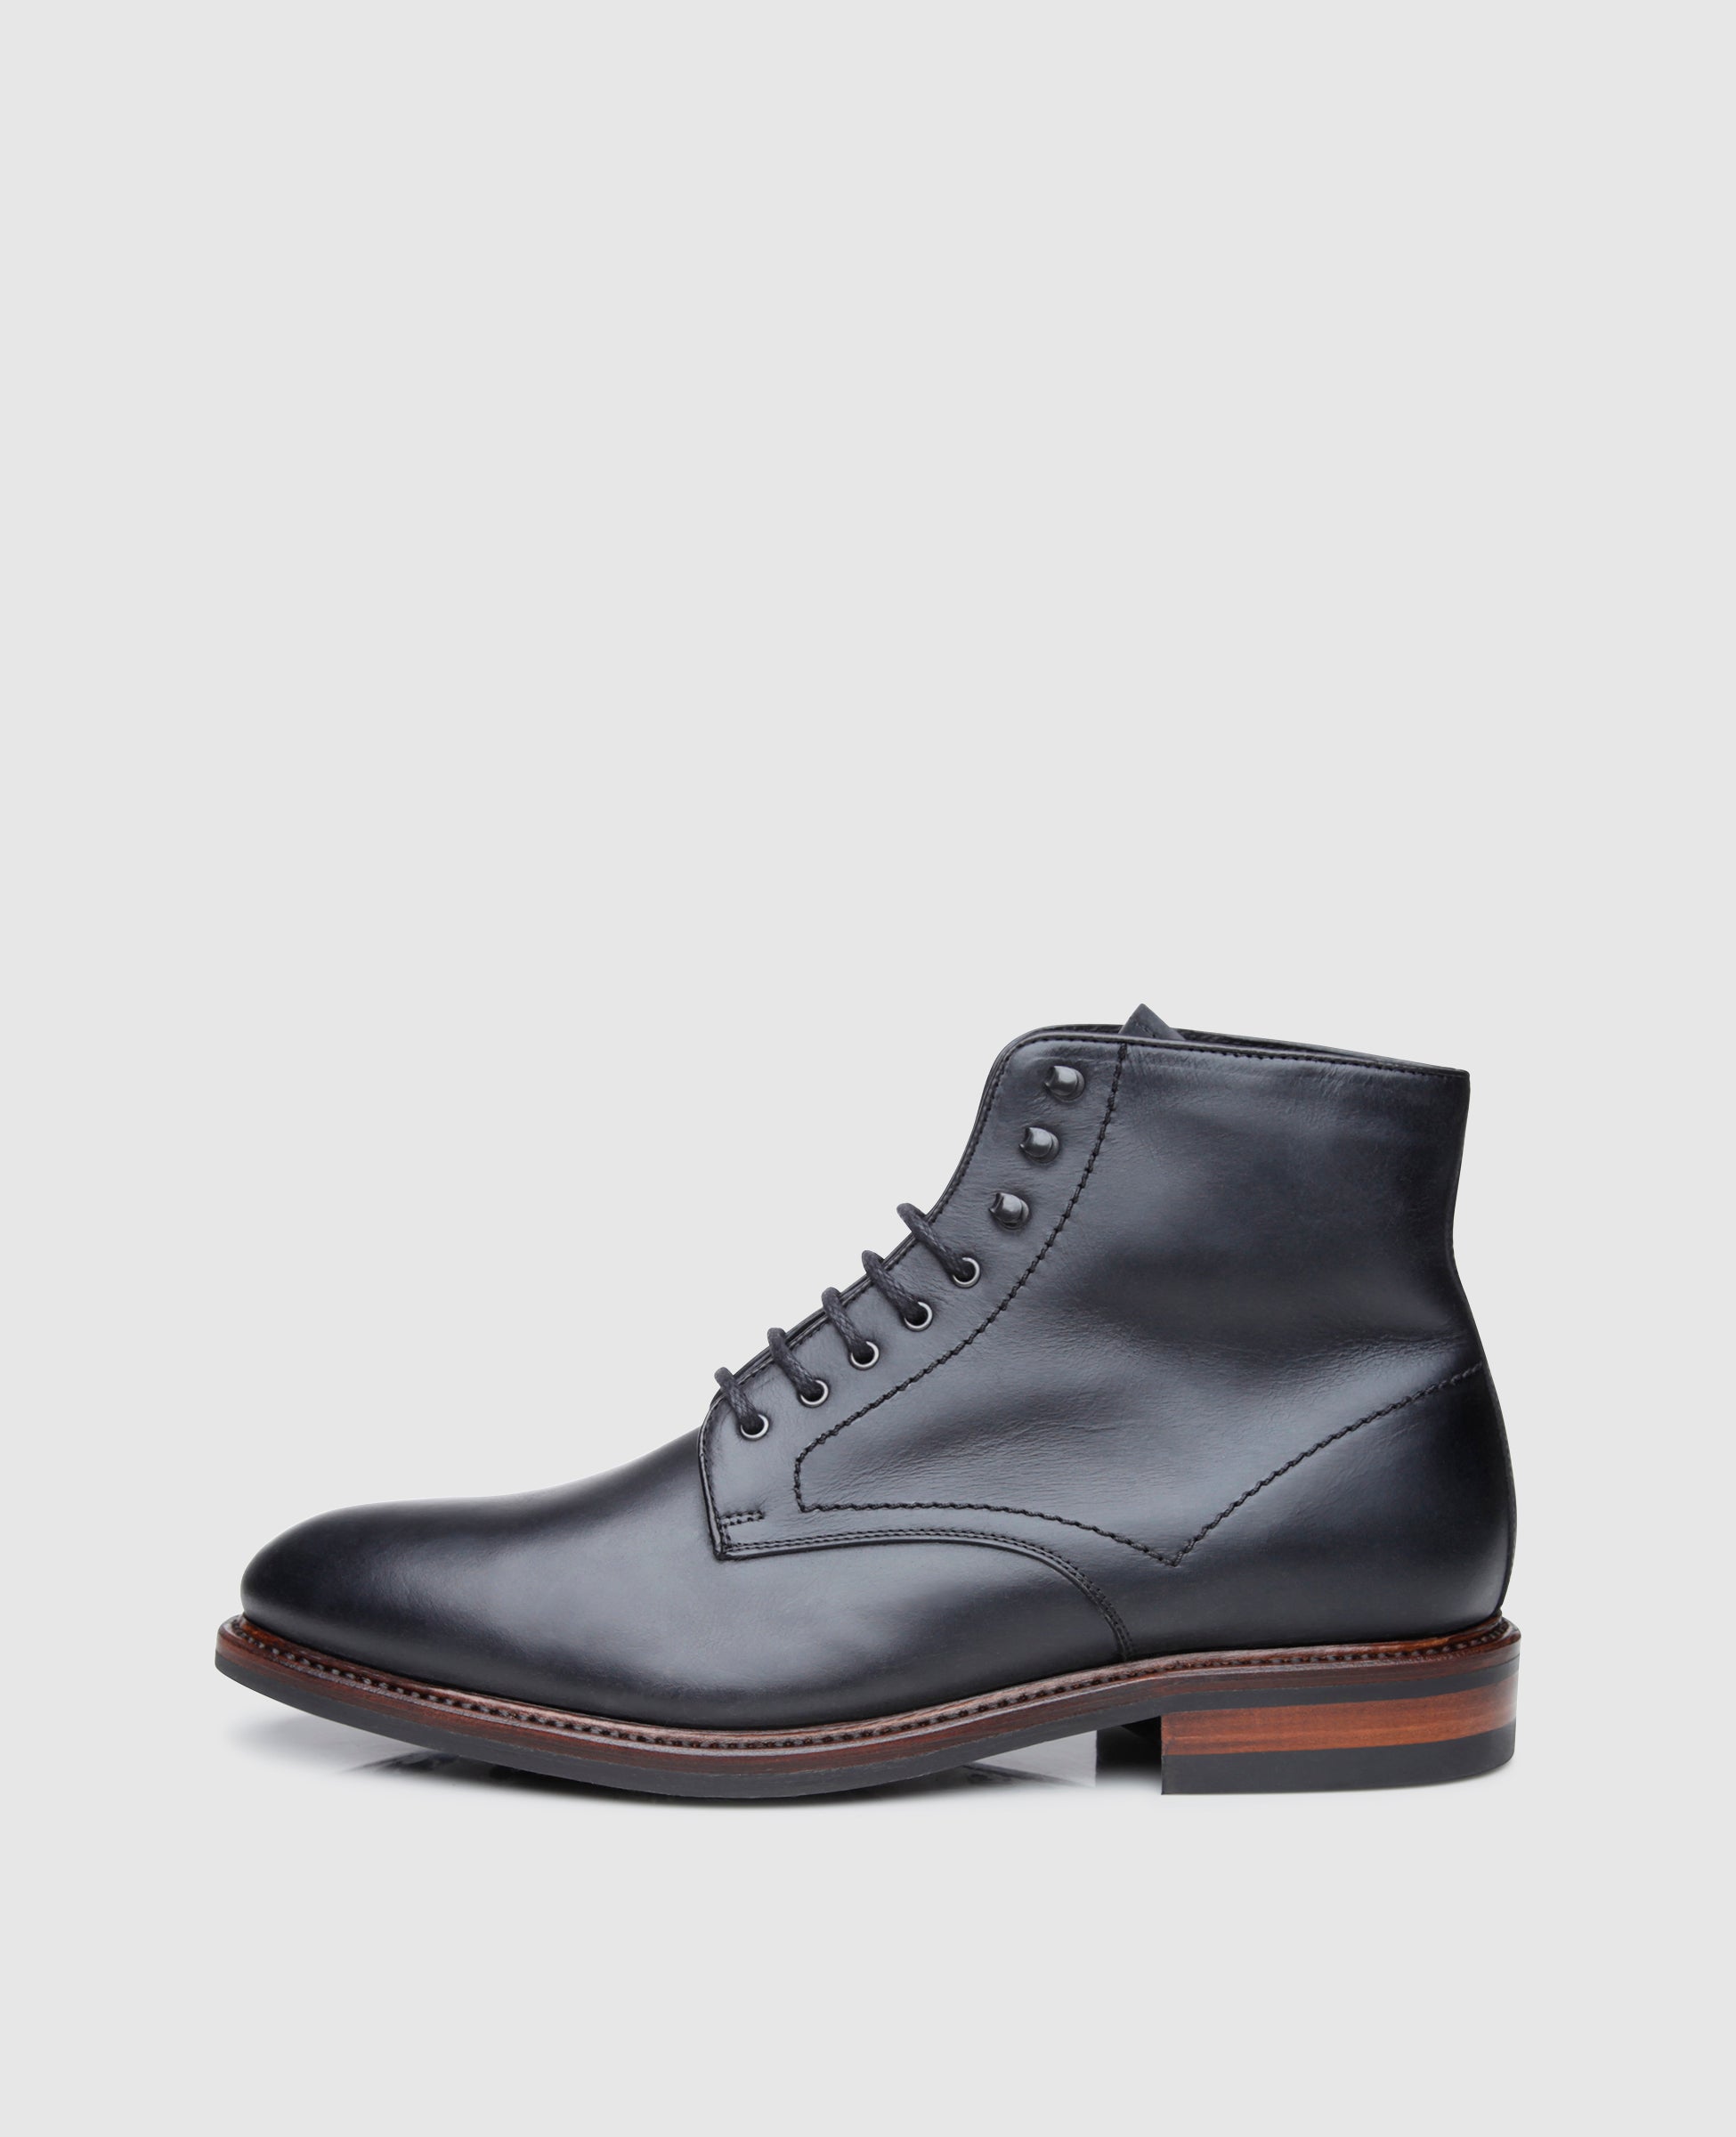 SHOEPASSION.com – Goodyear-welted Derby Boot for Men in Black | Shoepassion